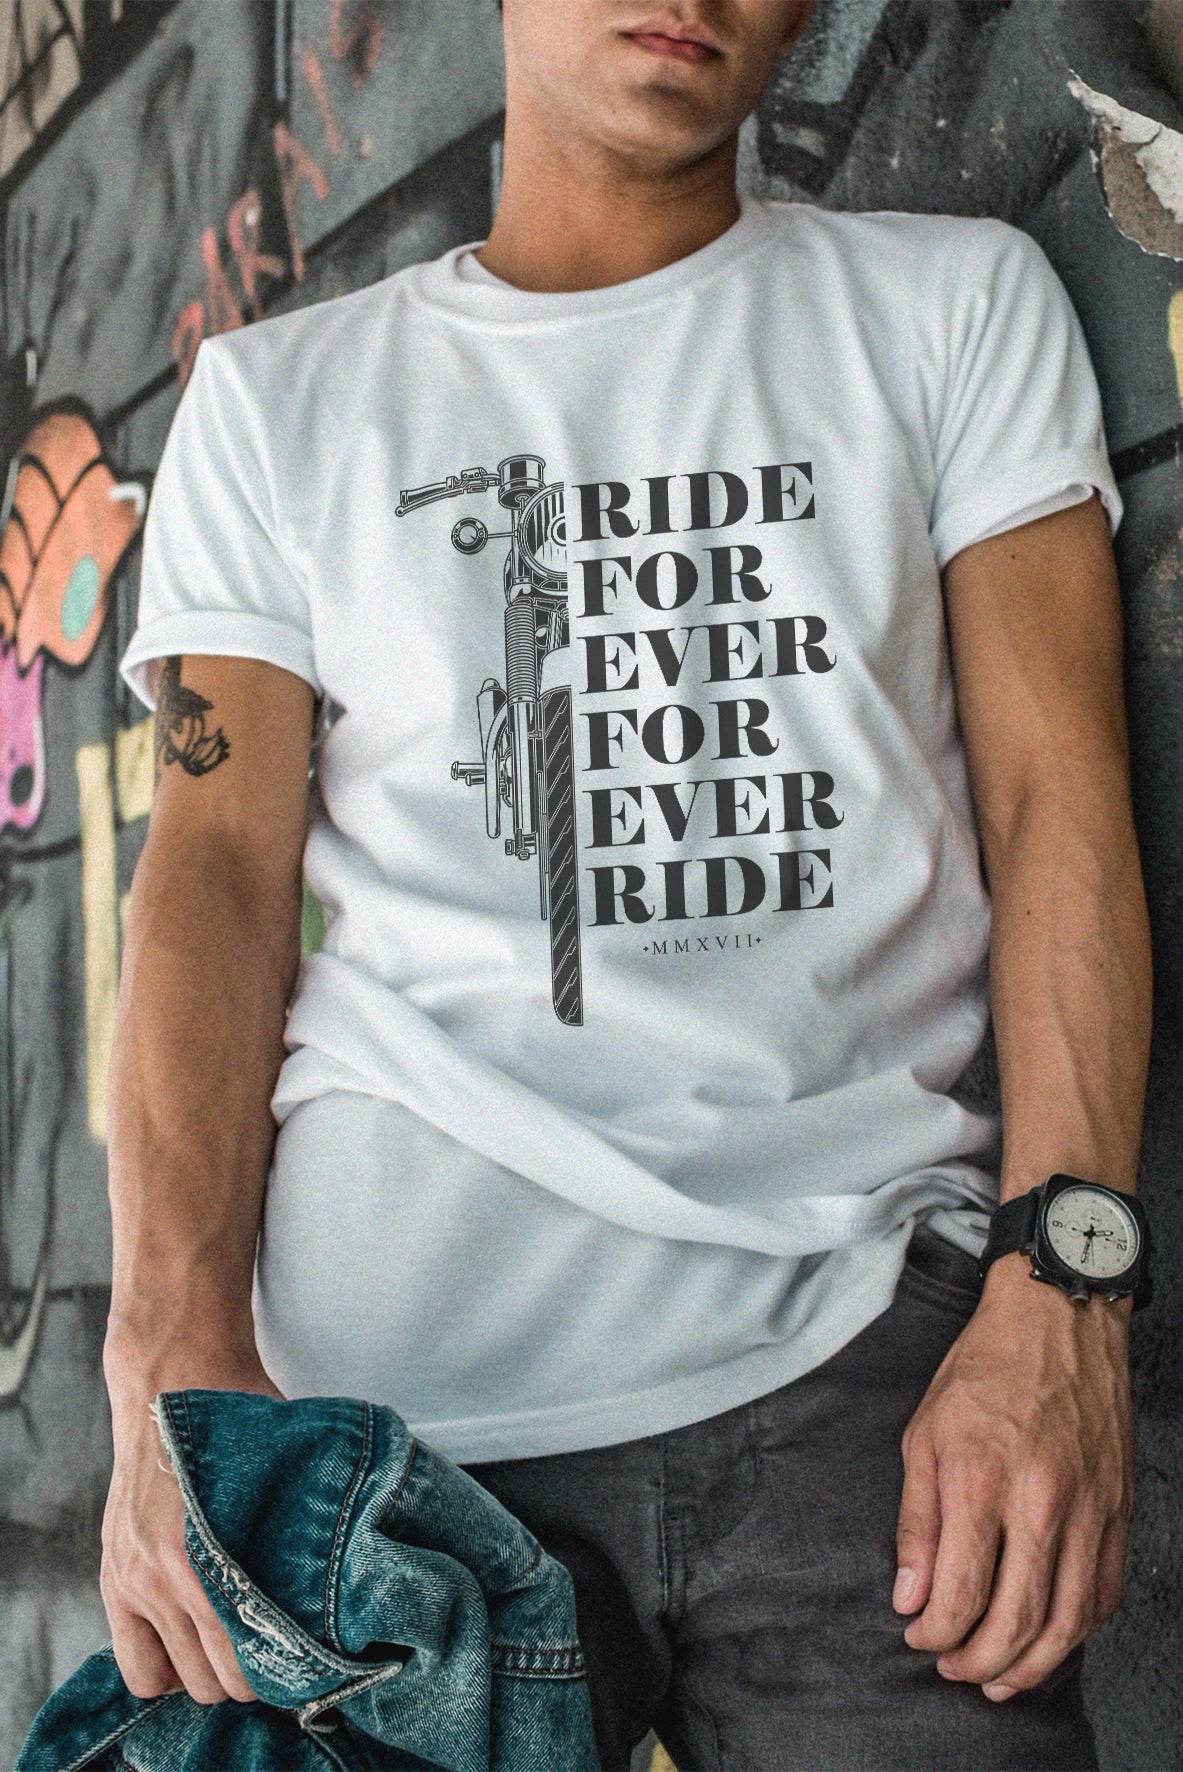 "RIDE FOR EVER" T-shirt